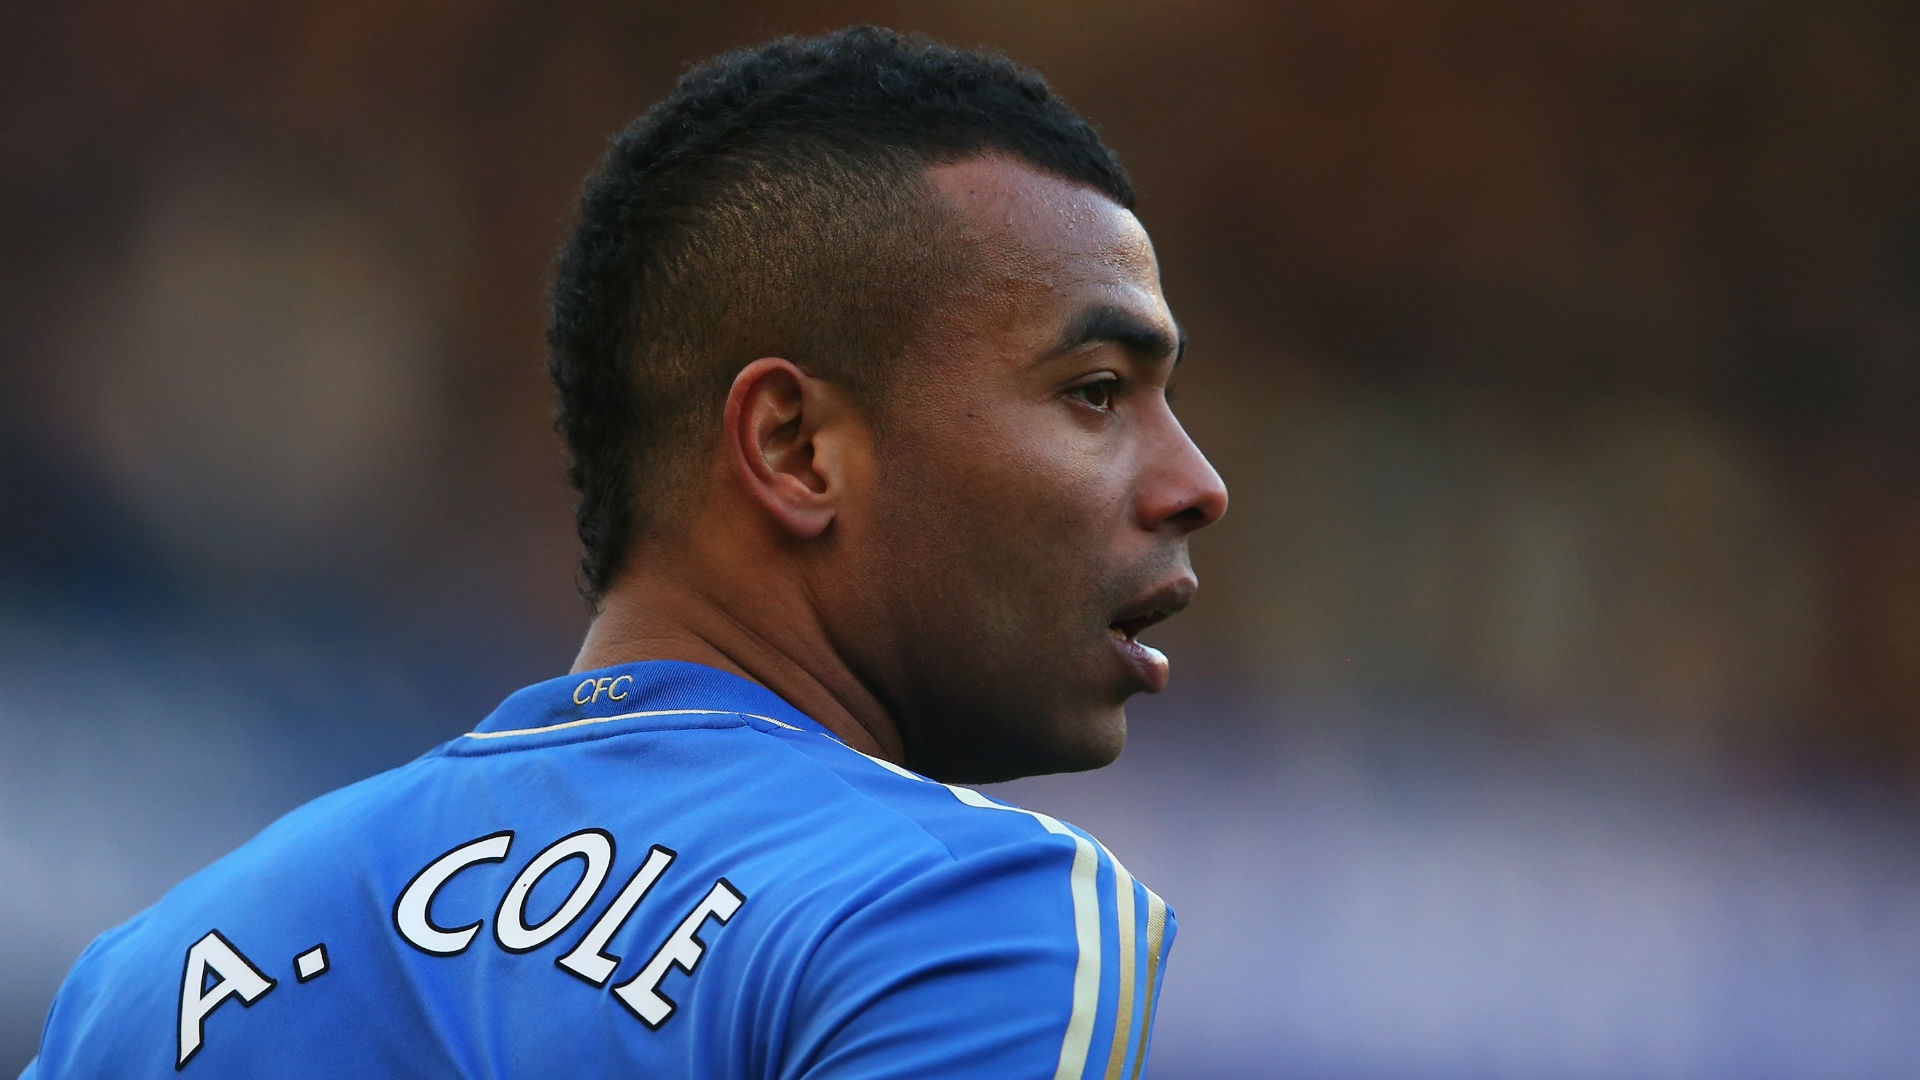 Chelsea win a 'championship performance', says Ashley Cole